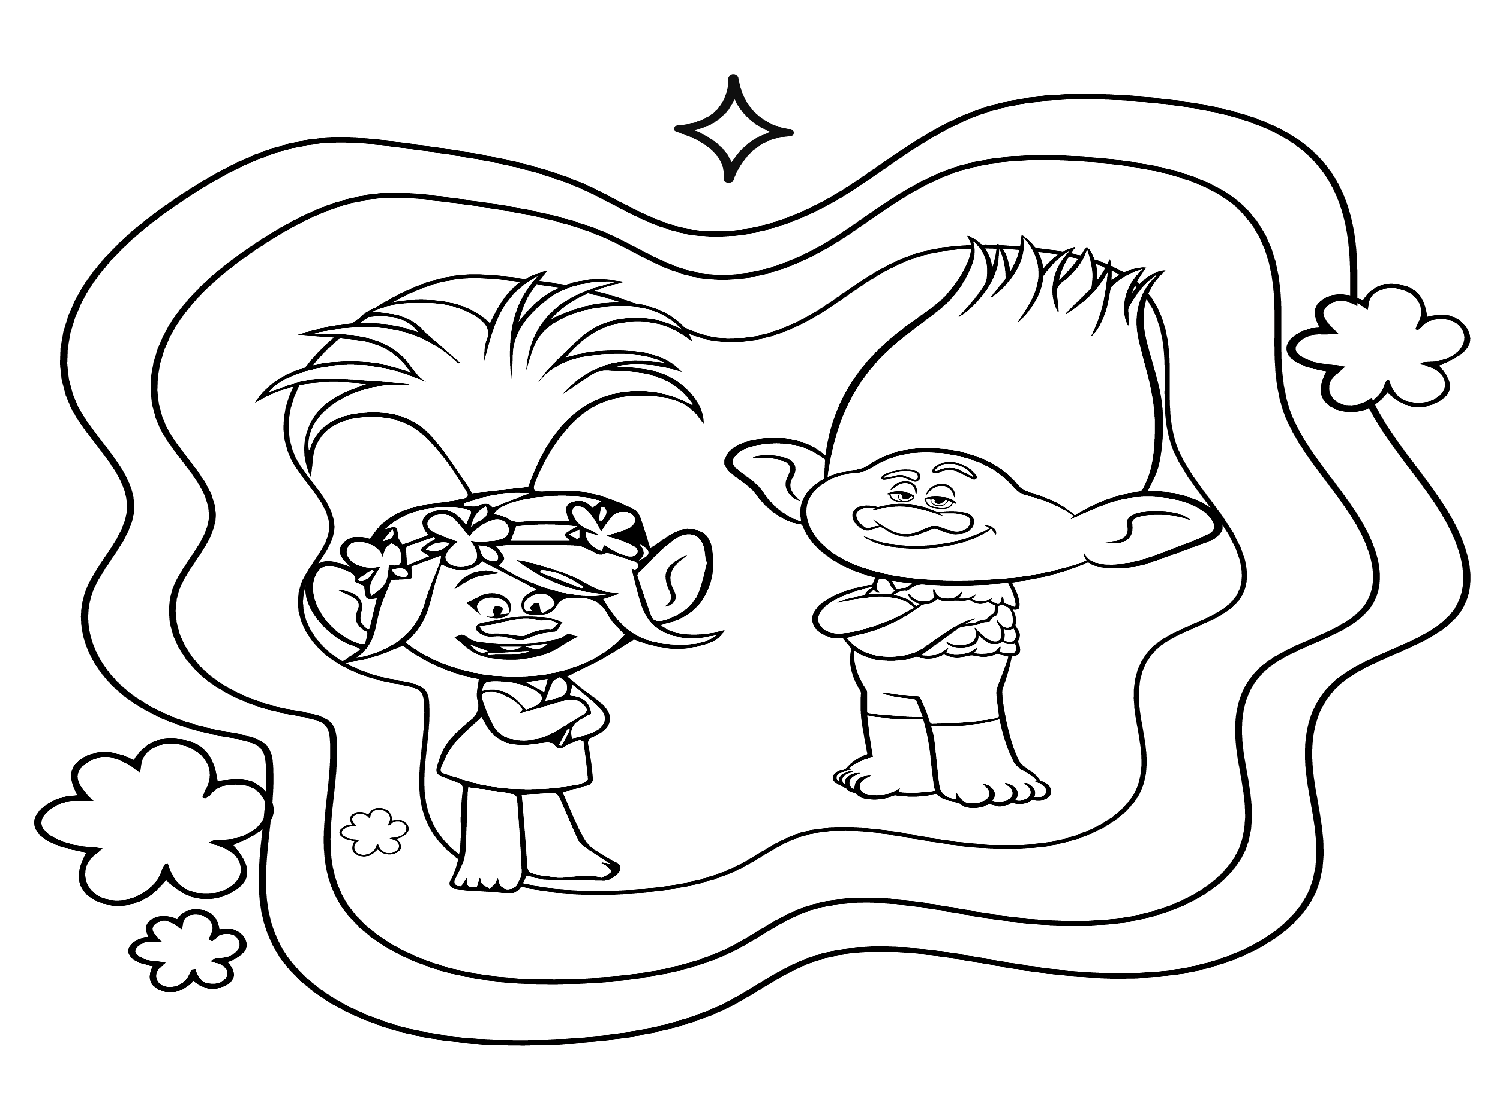 Trolls World Tour free Coloring Page